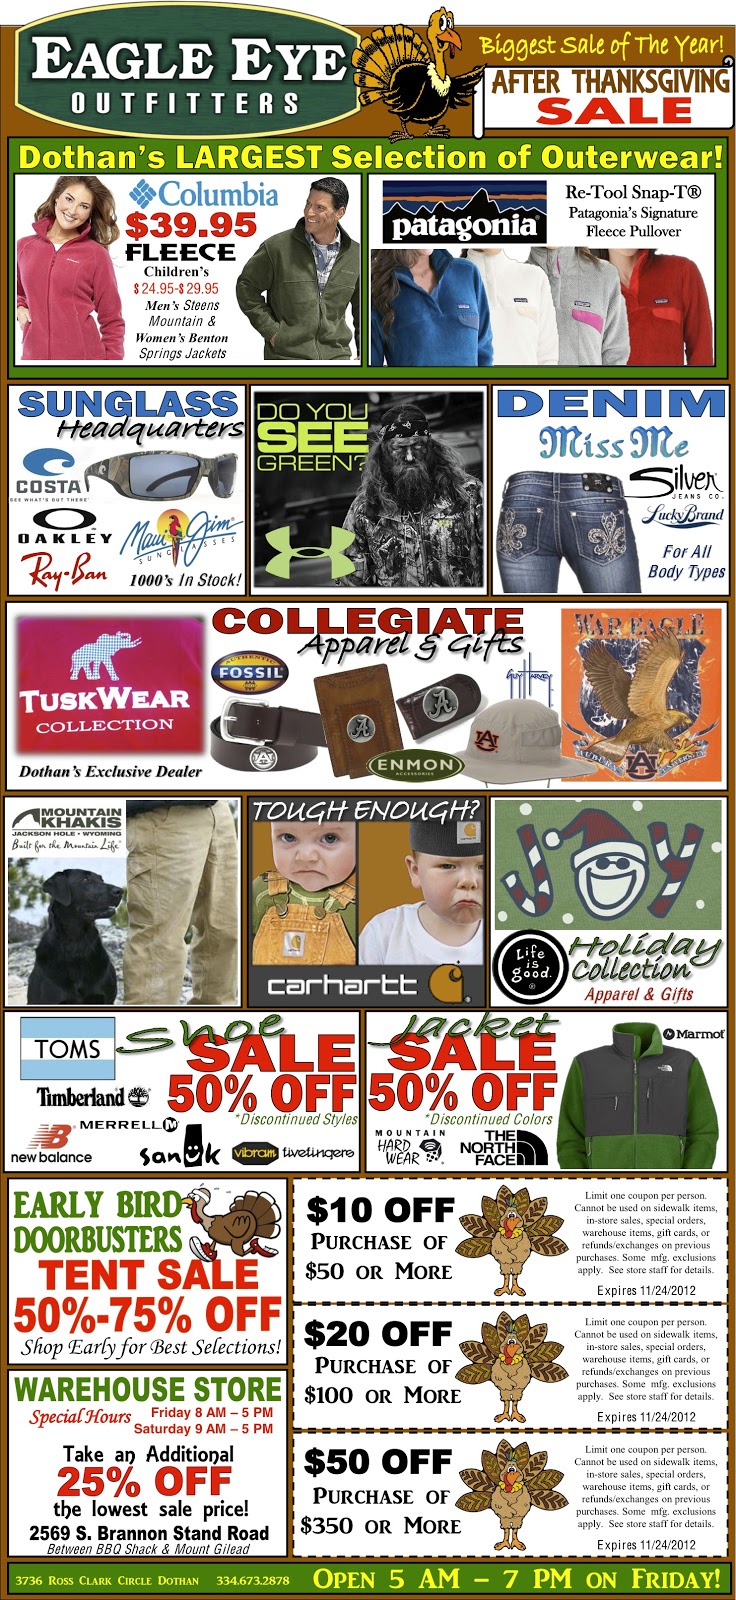 Eagle Eye Outfitters: Black Friday Deals!